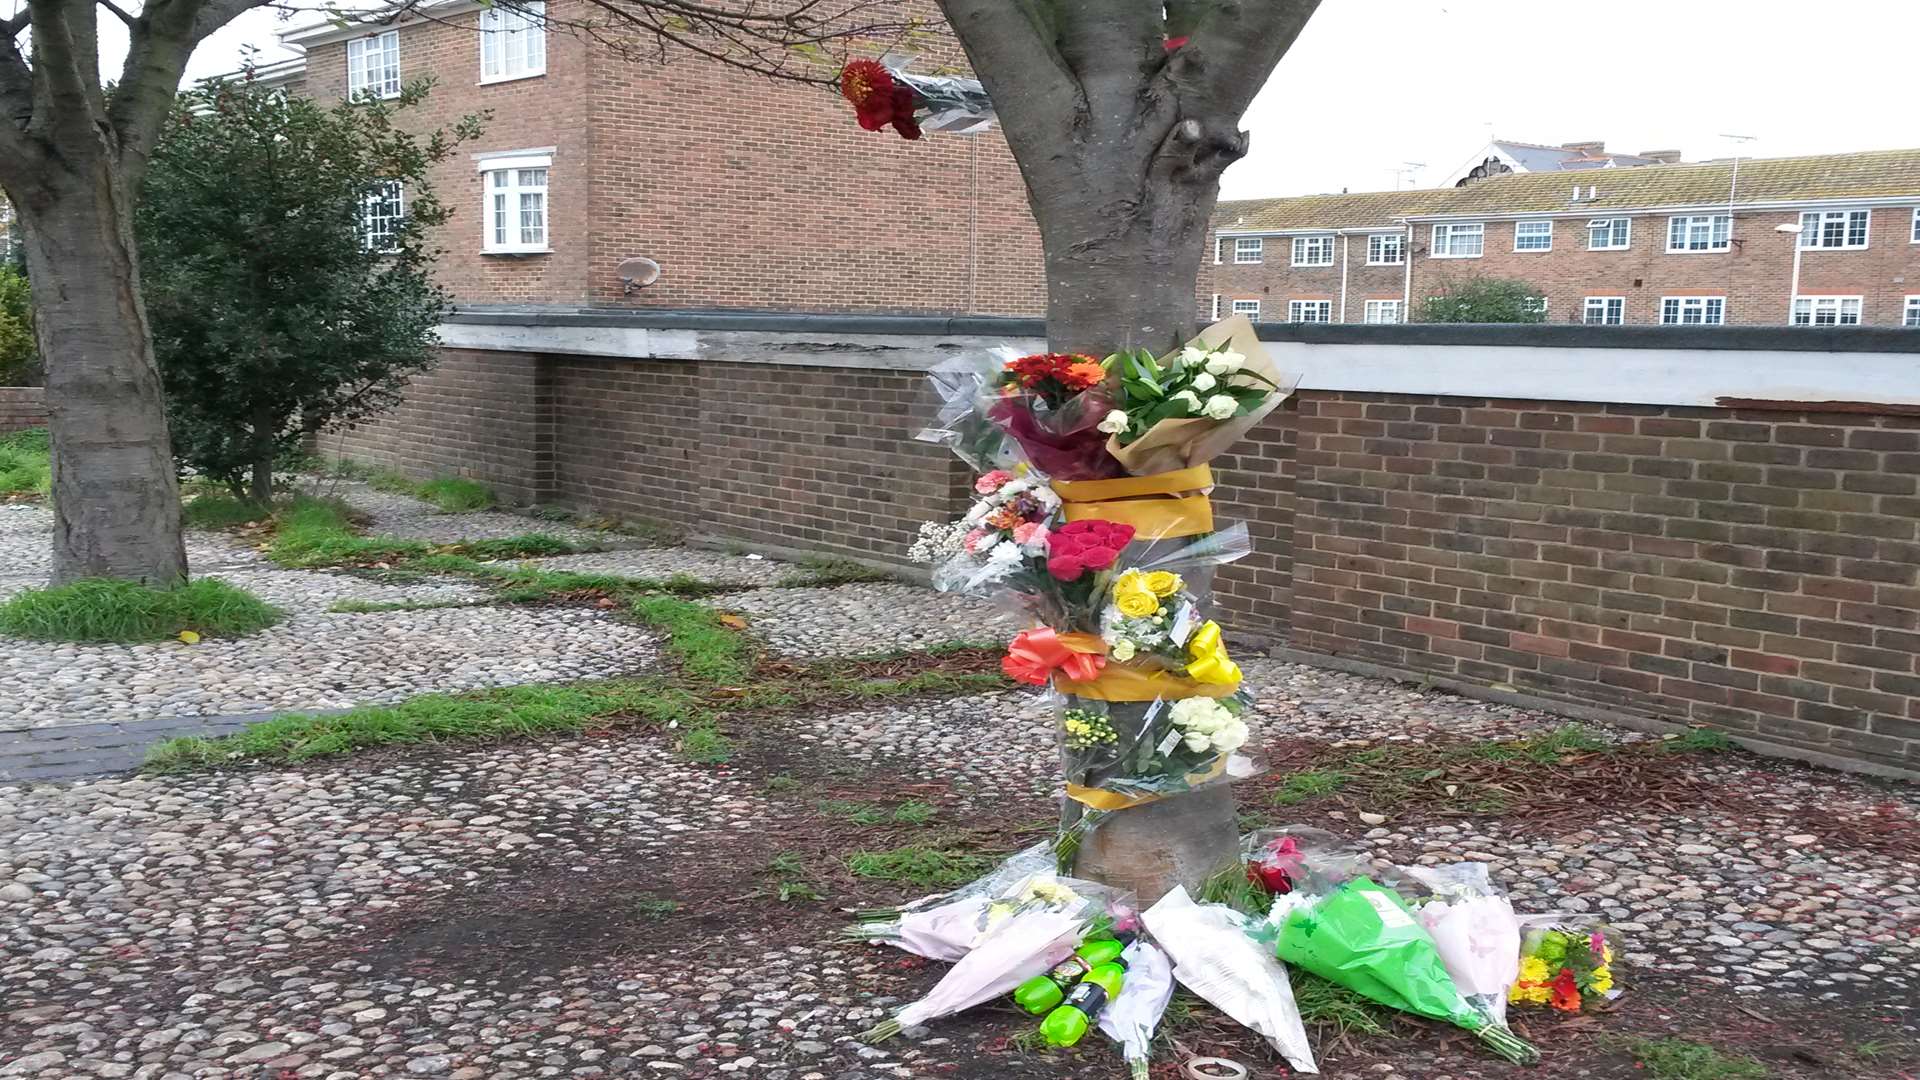 Floral tributes have been left at the crash site